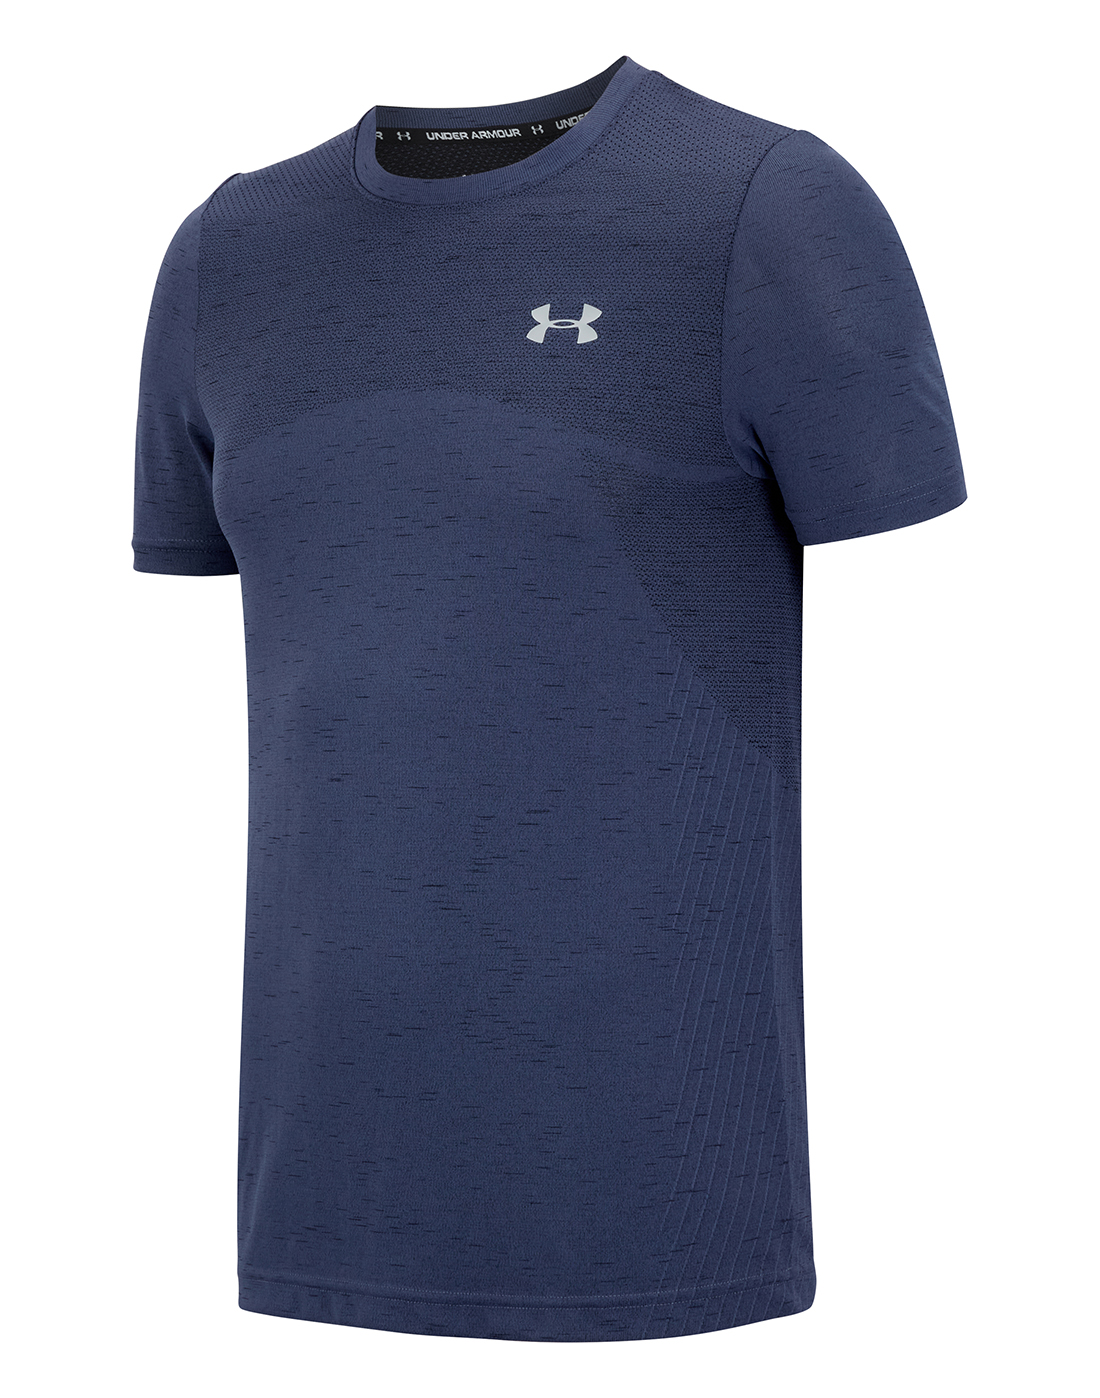 Under Armour Mens Seamless T-shirt - Blue | Life Style Sports IE